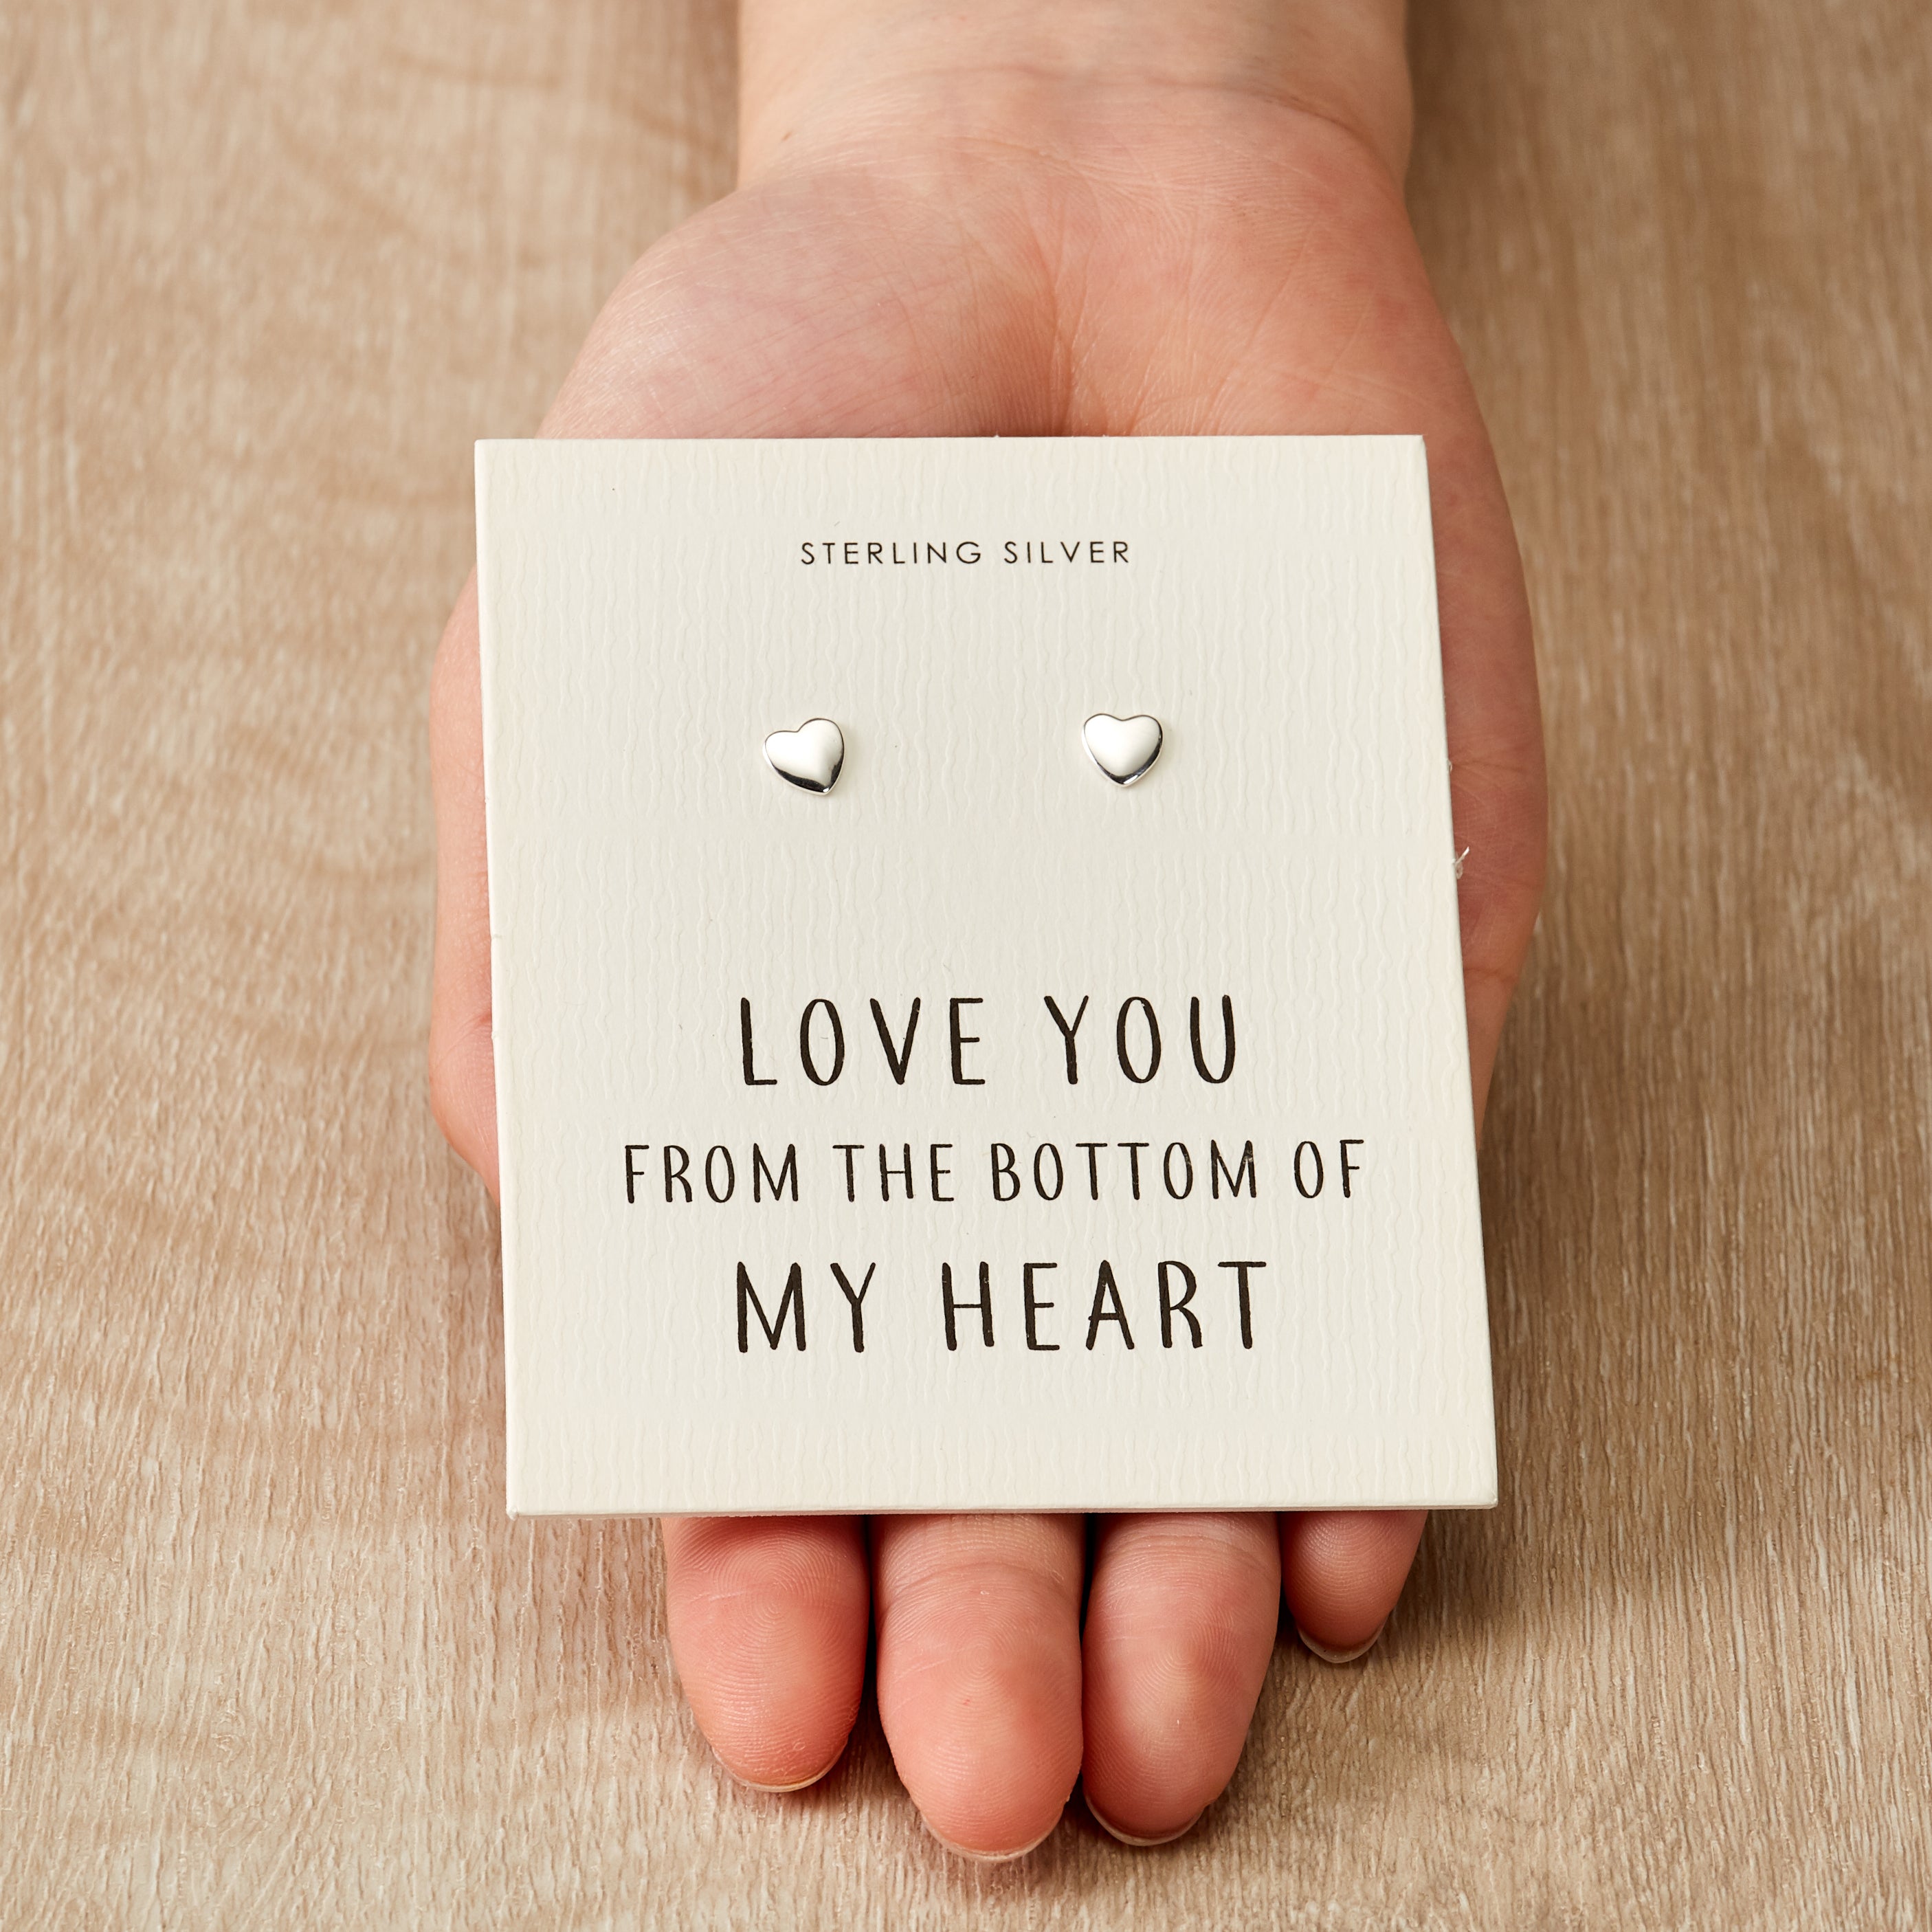 Sterling Silver Bottom of My Heart Earrings with Quote Card